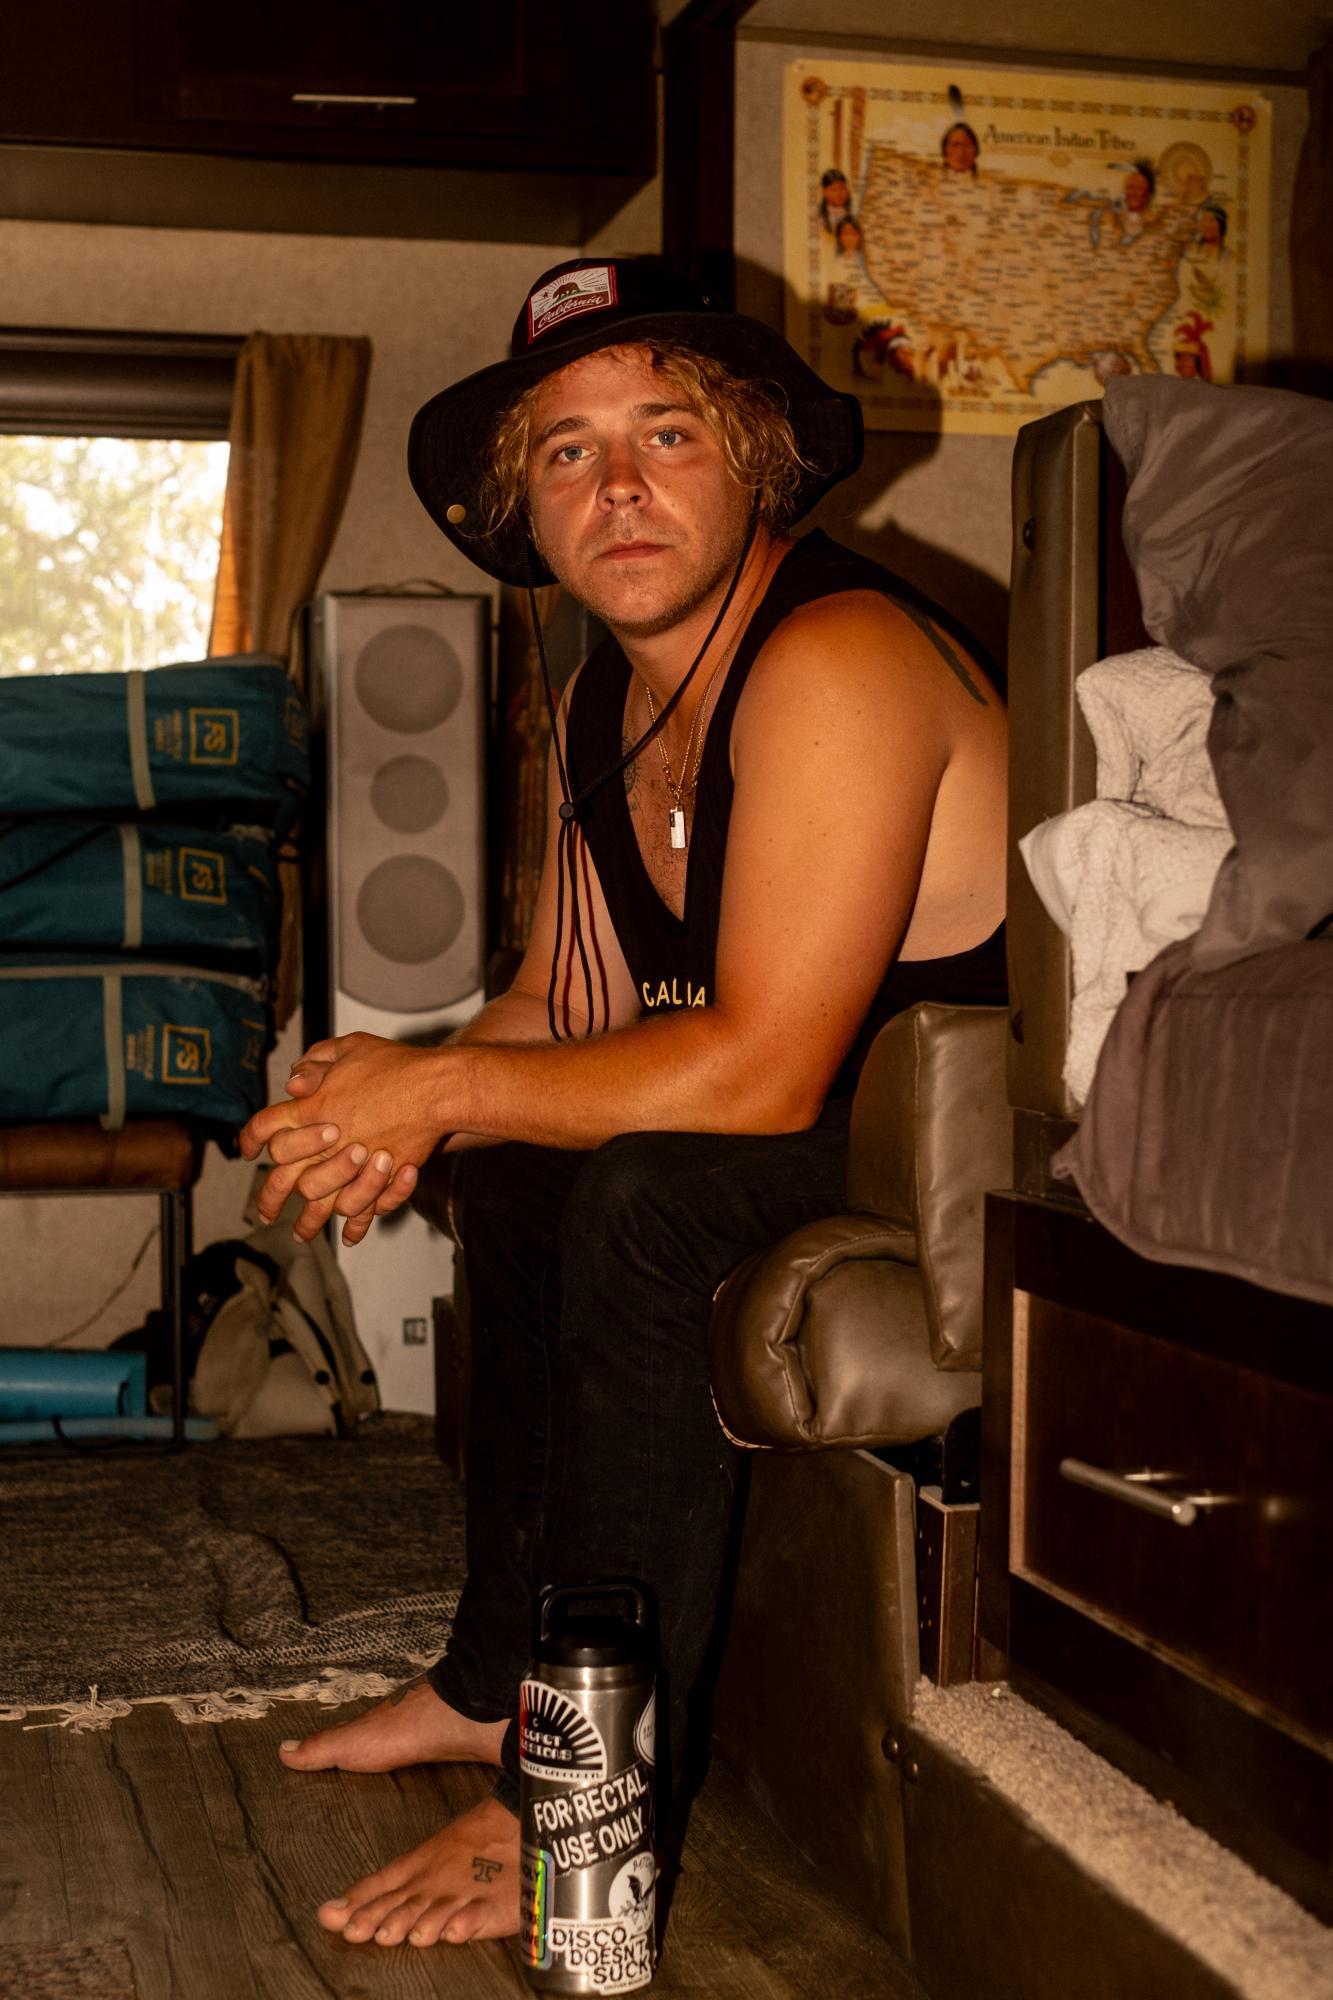 A Warm Winter (An Ongoing Journey) - A portrait of Duncan inside his RV. El Sargento, Baja...